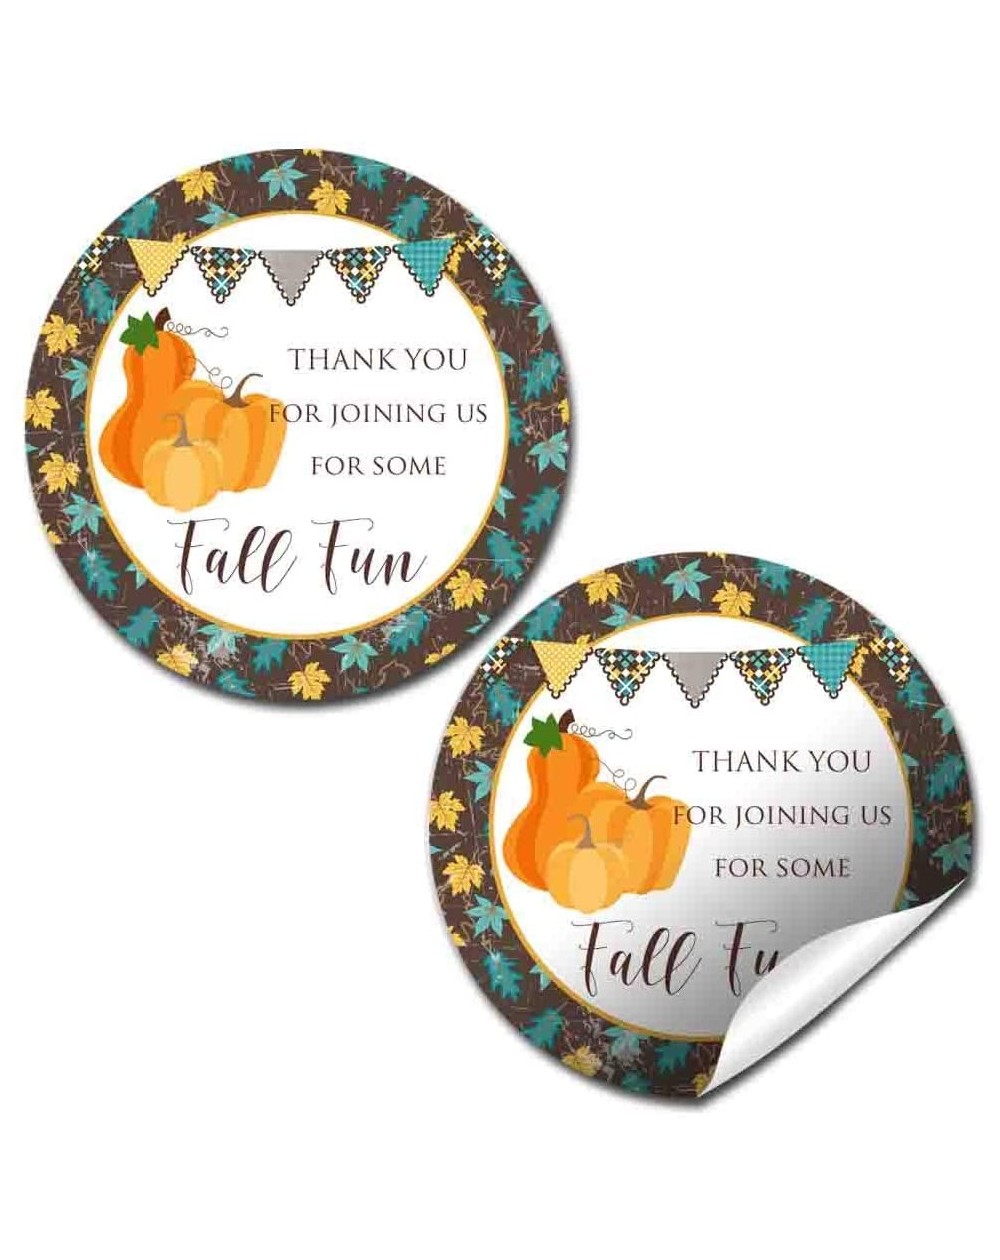 Favors Fall Fun Pumpkins & Leaves Teal Thank You Sticker Labels- 40 2" Party Circle Stickers by AmandaCreation- Great for Par...